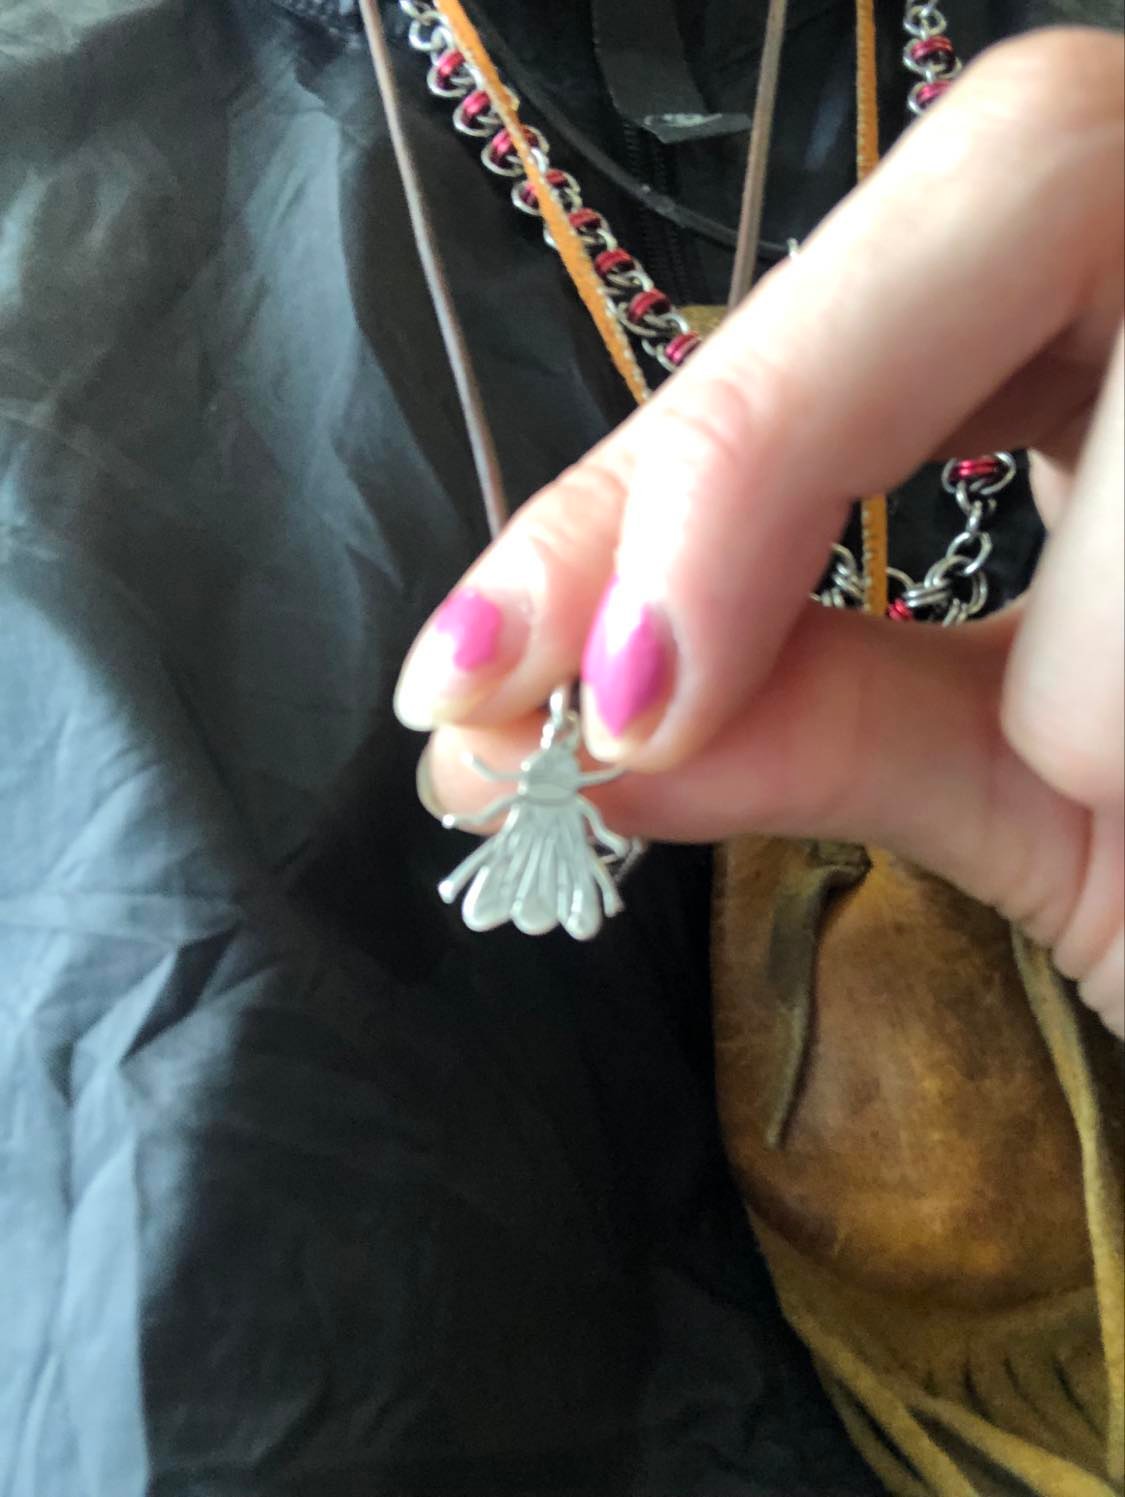 Kabutroid holding up the spiritual housefly pendant around her neck, with the Rosary, Medicine bag, and Crow pendant behind, and wearing a black windbreaker for the day.